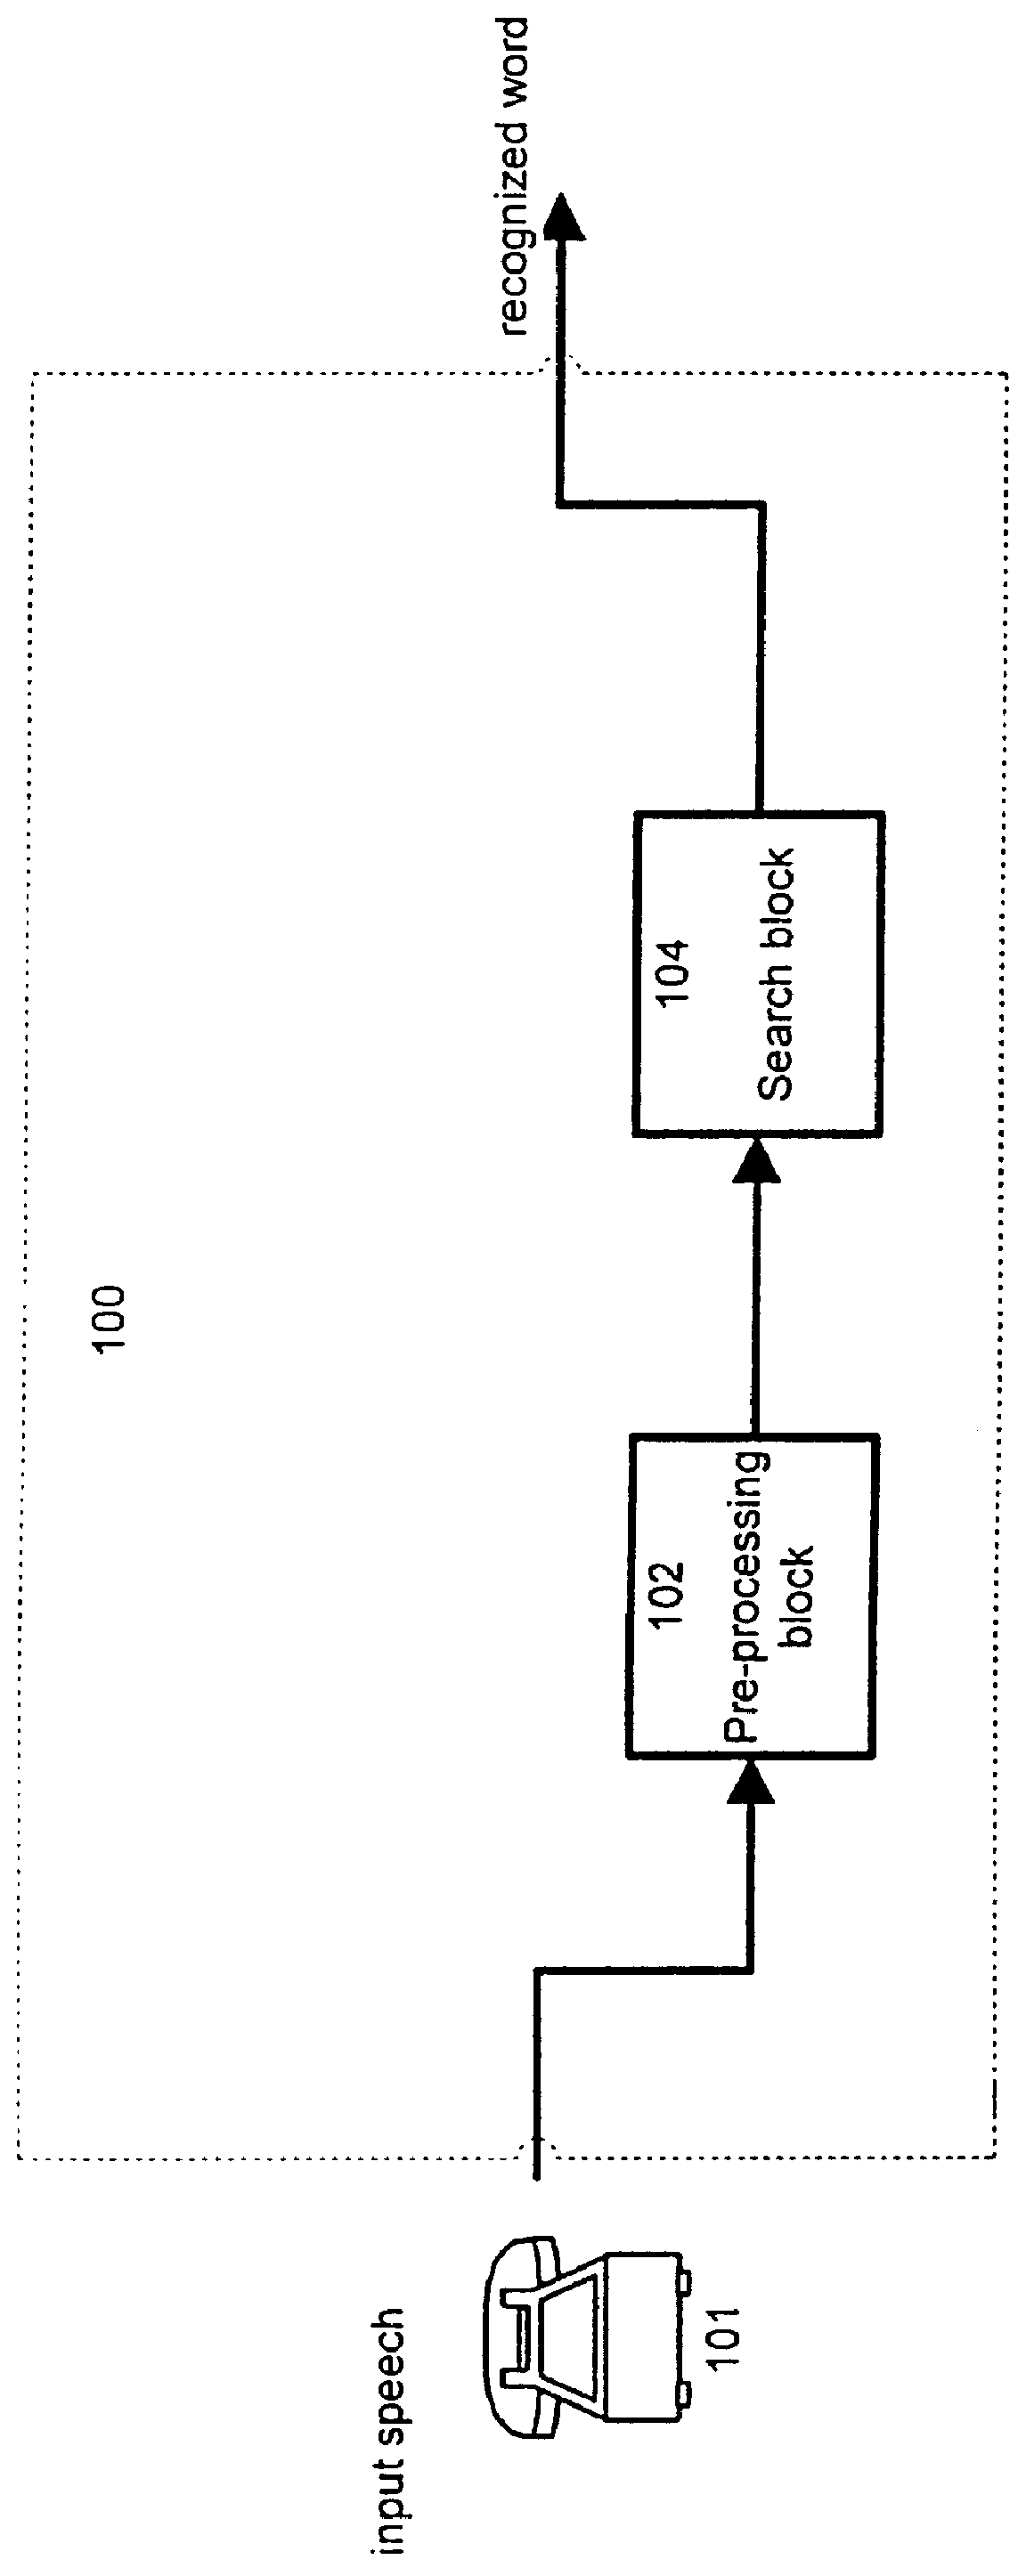 Method and apparatus for performing speech recognition utilizing a supplementary lexicon of frequently used orthographies